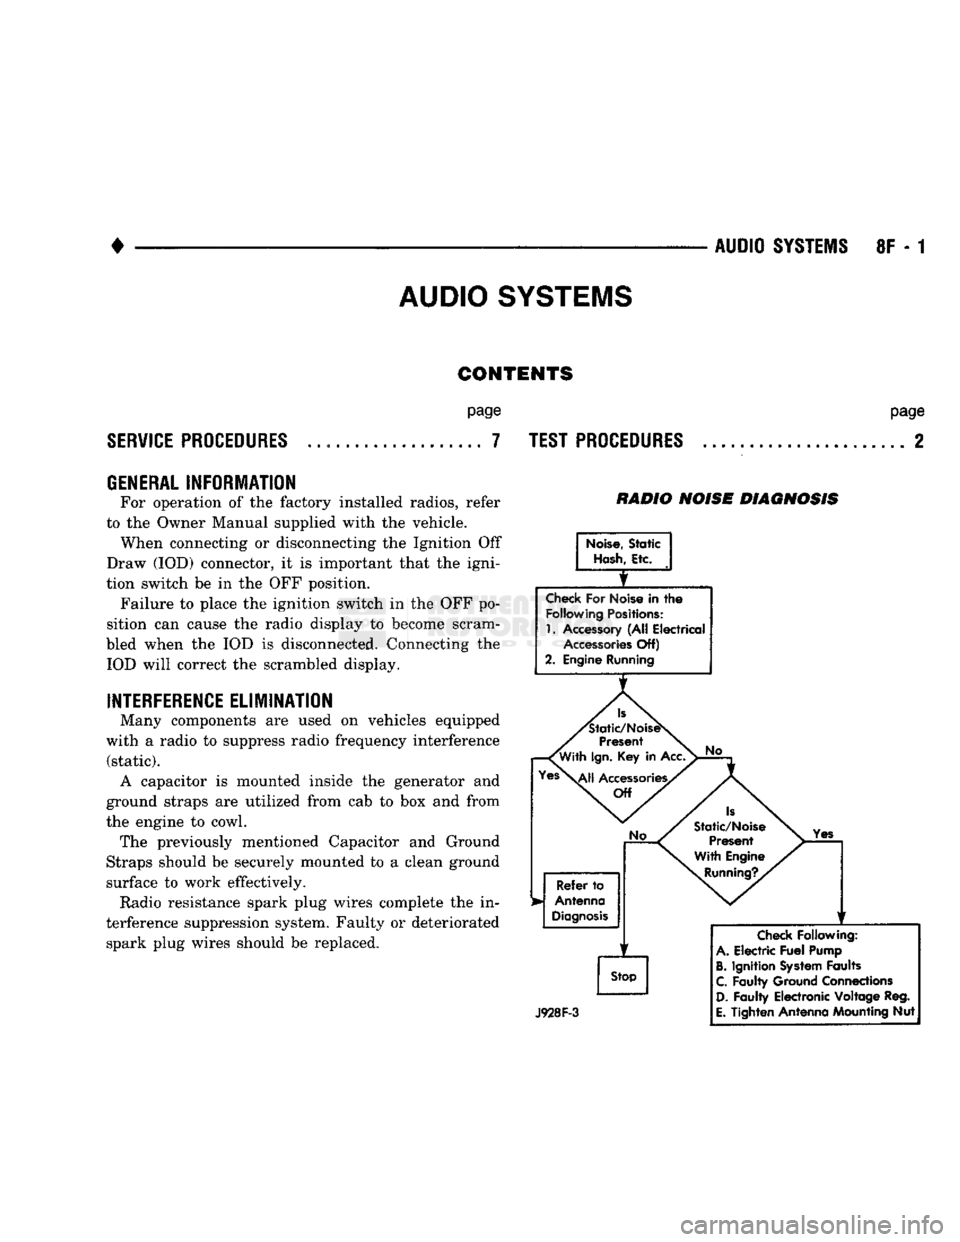 DODGE TRUCK 1993  Service Repair Manual 
AUDIO SYSTEMS 
CONTENTS 

SERVICE
 PROCEDURES 
 page 

.. 7 
 TEST PROCEDURES 
 page 

.. 2 

GENERAL
 INFORMATION 
 For operation of the factory installed radios, refer 
to the Owner Manual supplied